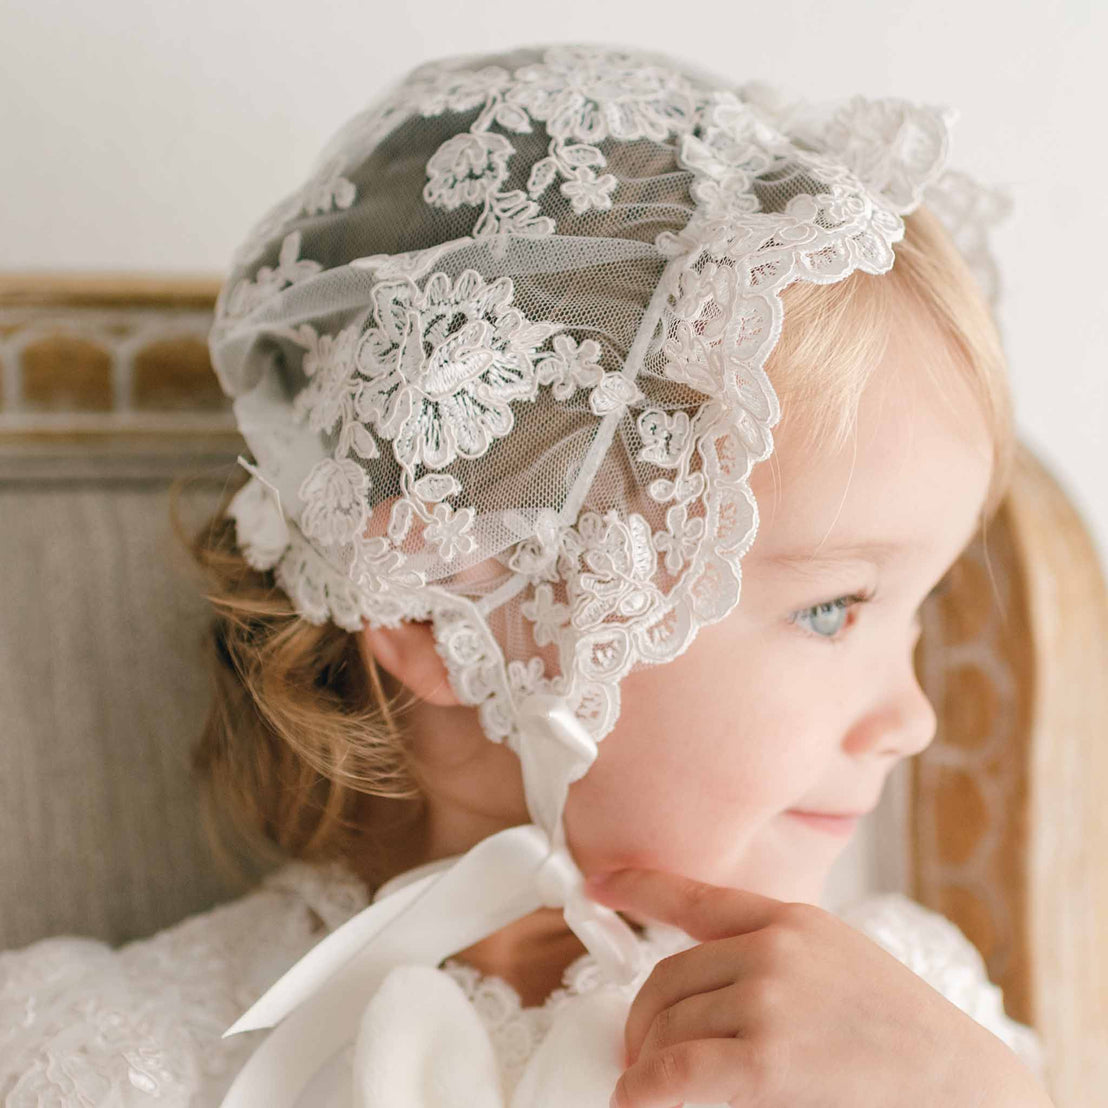 Profile of young girl wearing a beautiful lace baptism bonnet.